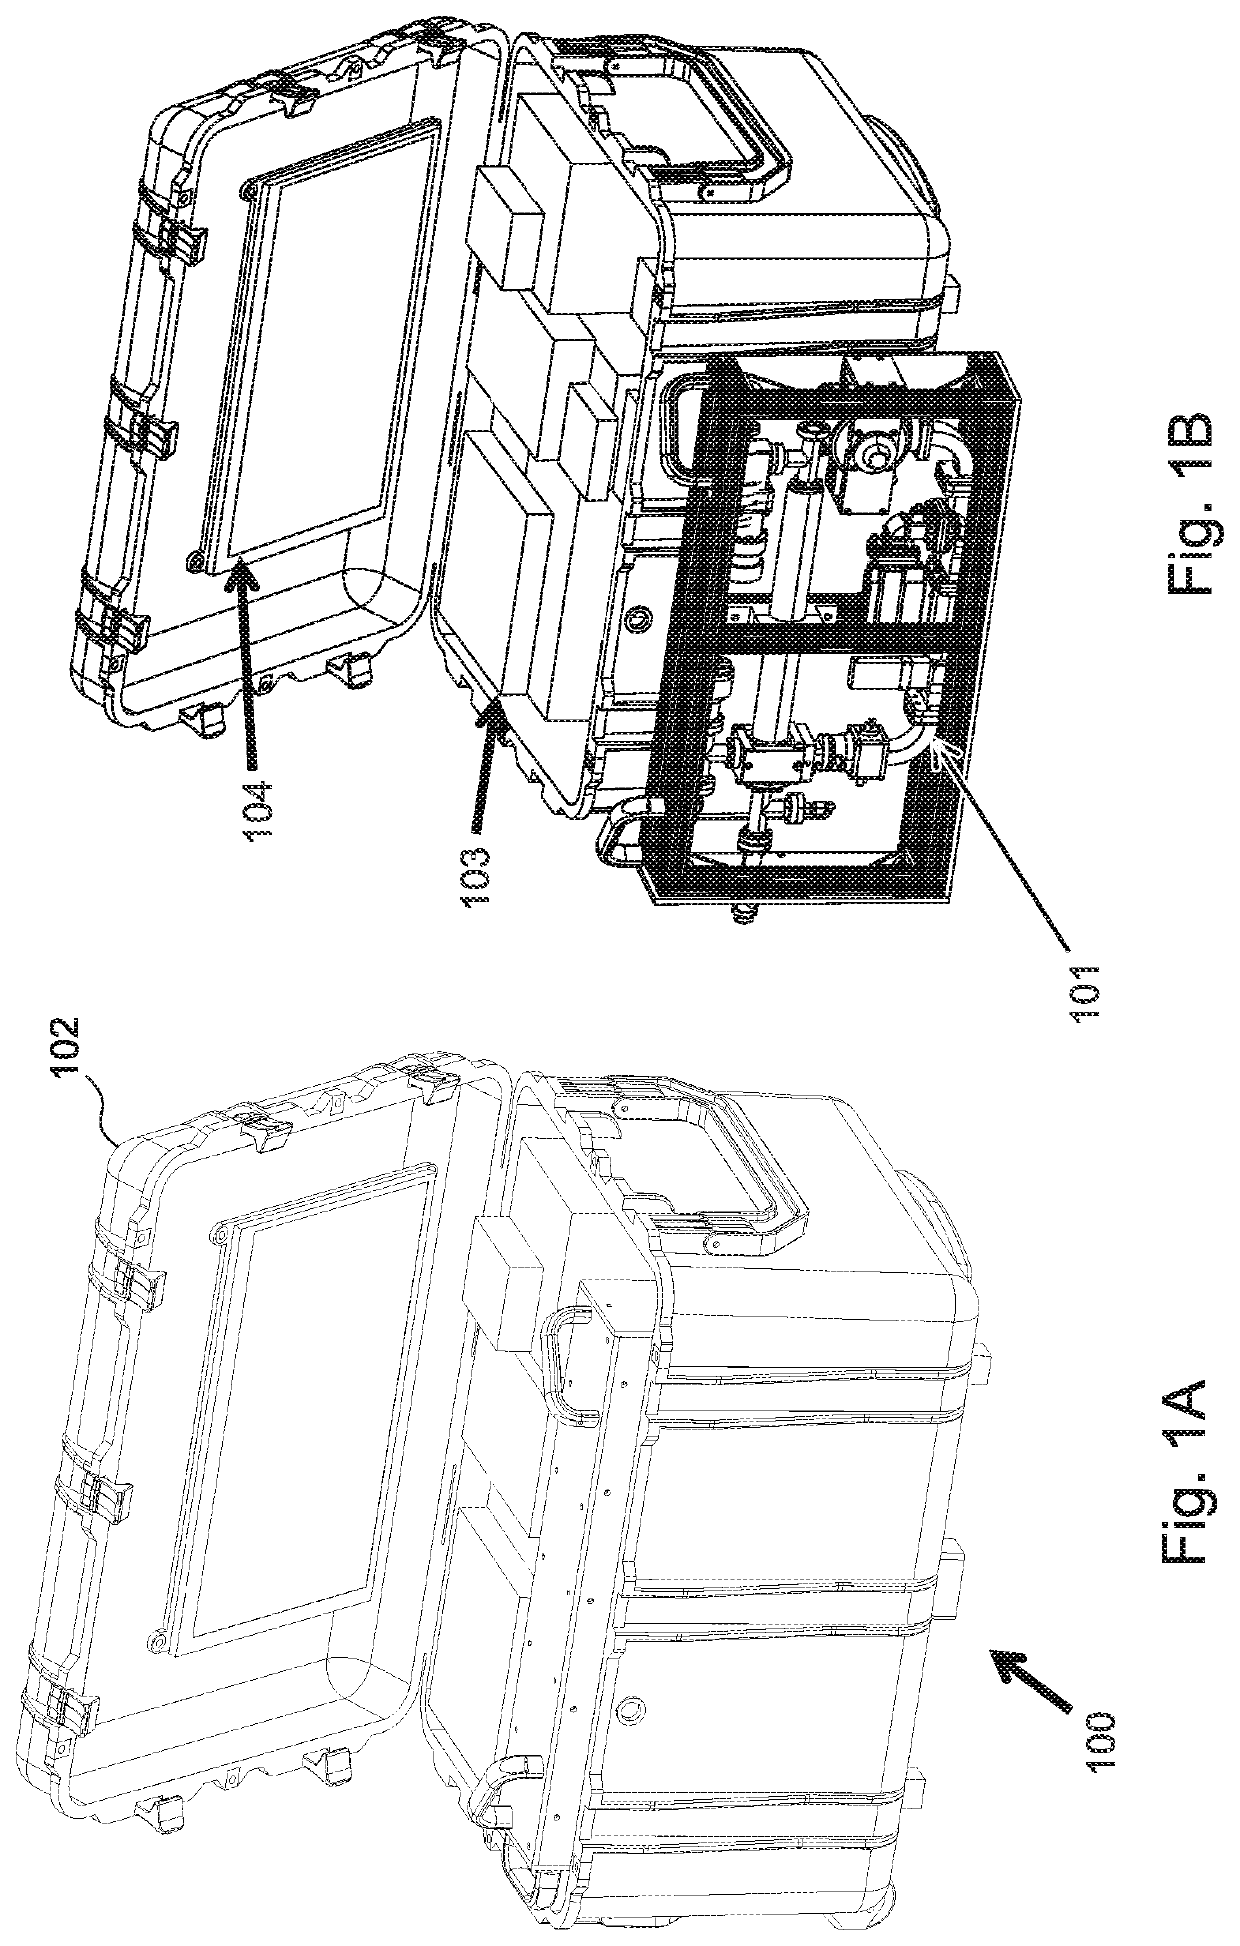 Portable accelerator based x-ray source for active interrogation systems